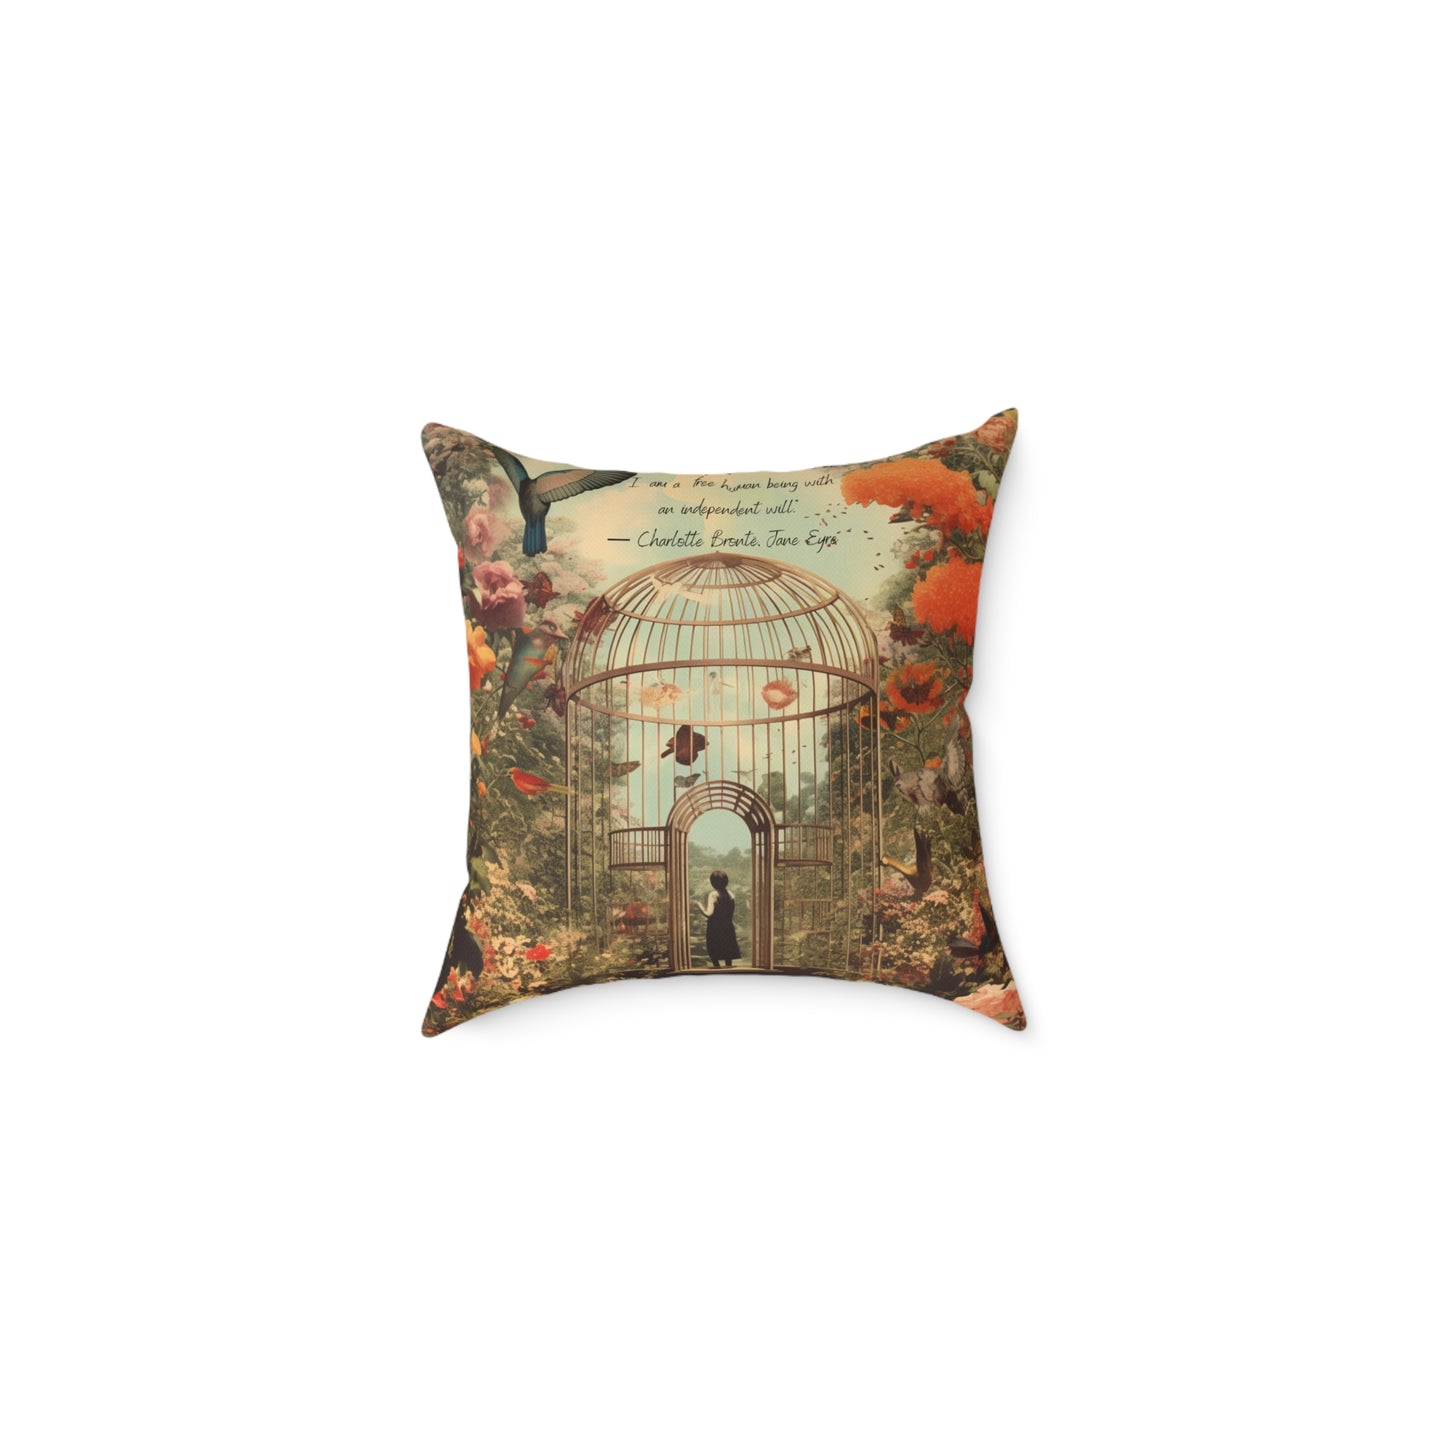 'I am not a bird', from Jane Eyre by Charlotte Bronte, quote on Luxury Cushion